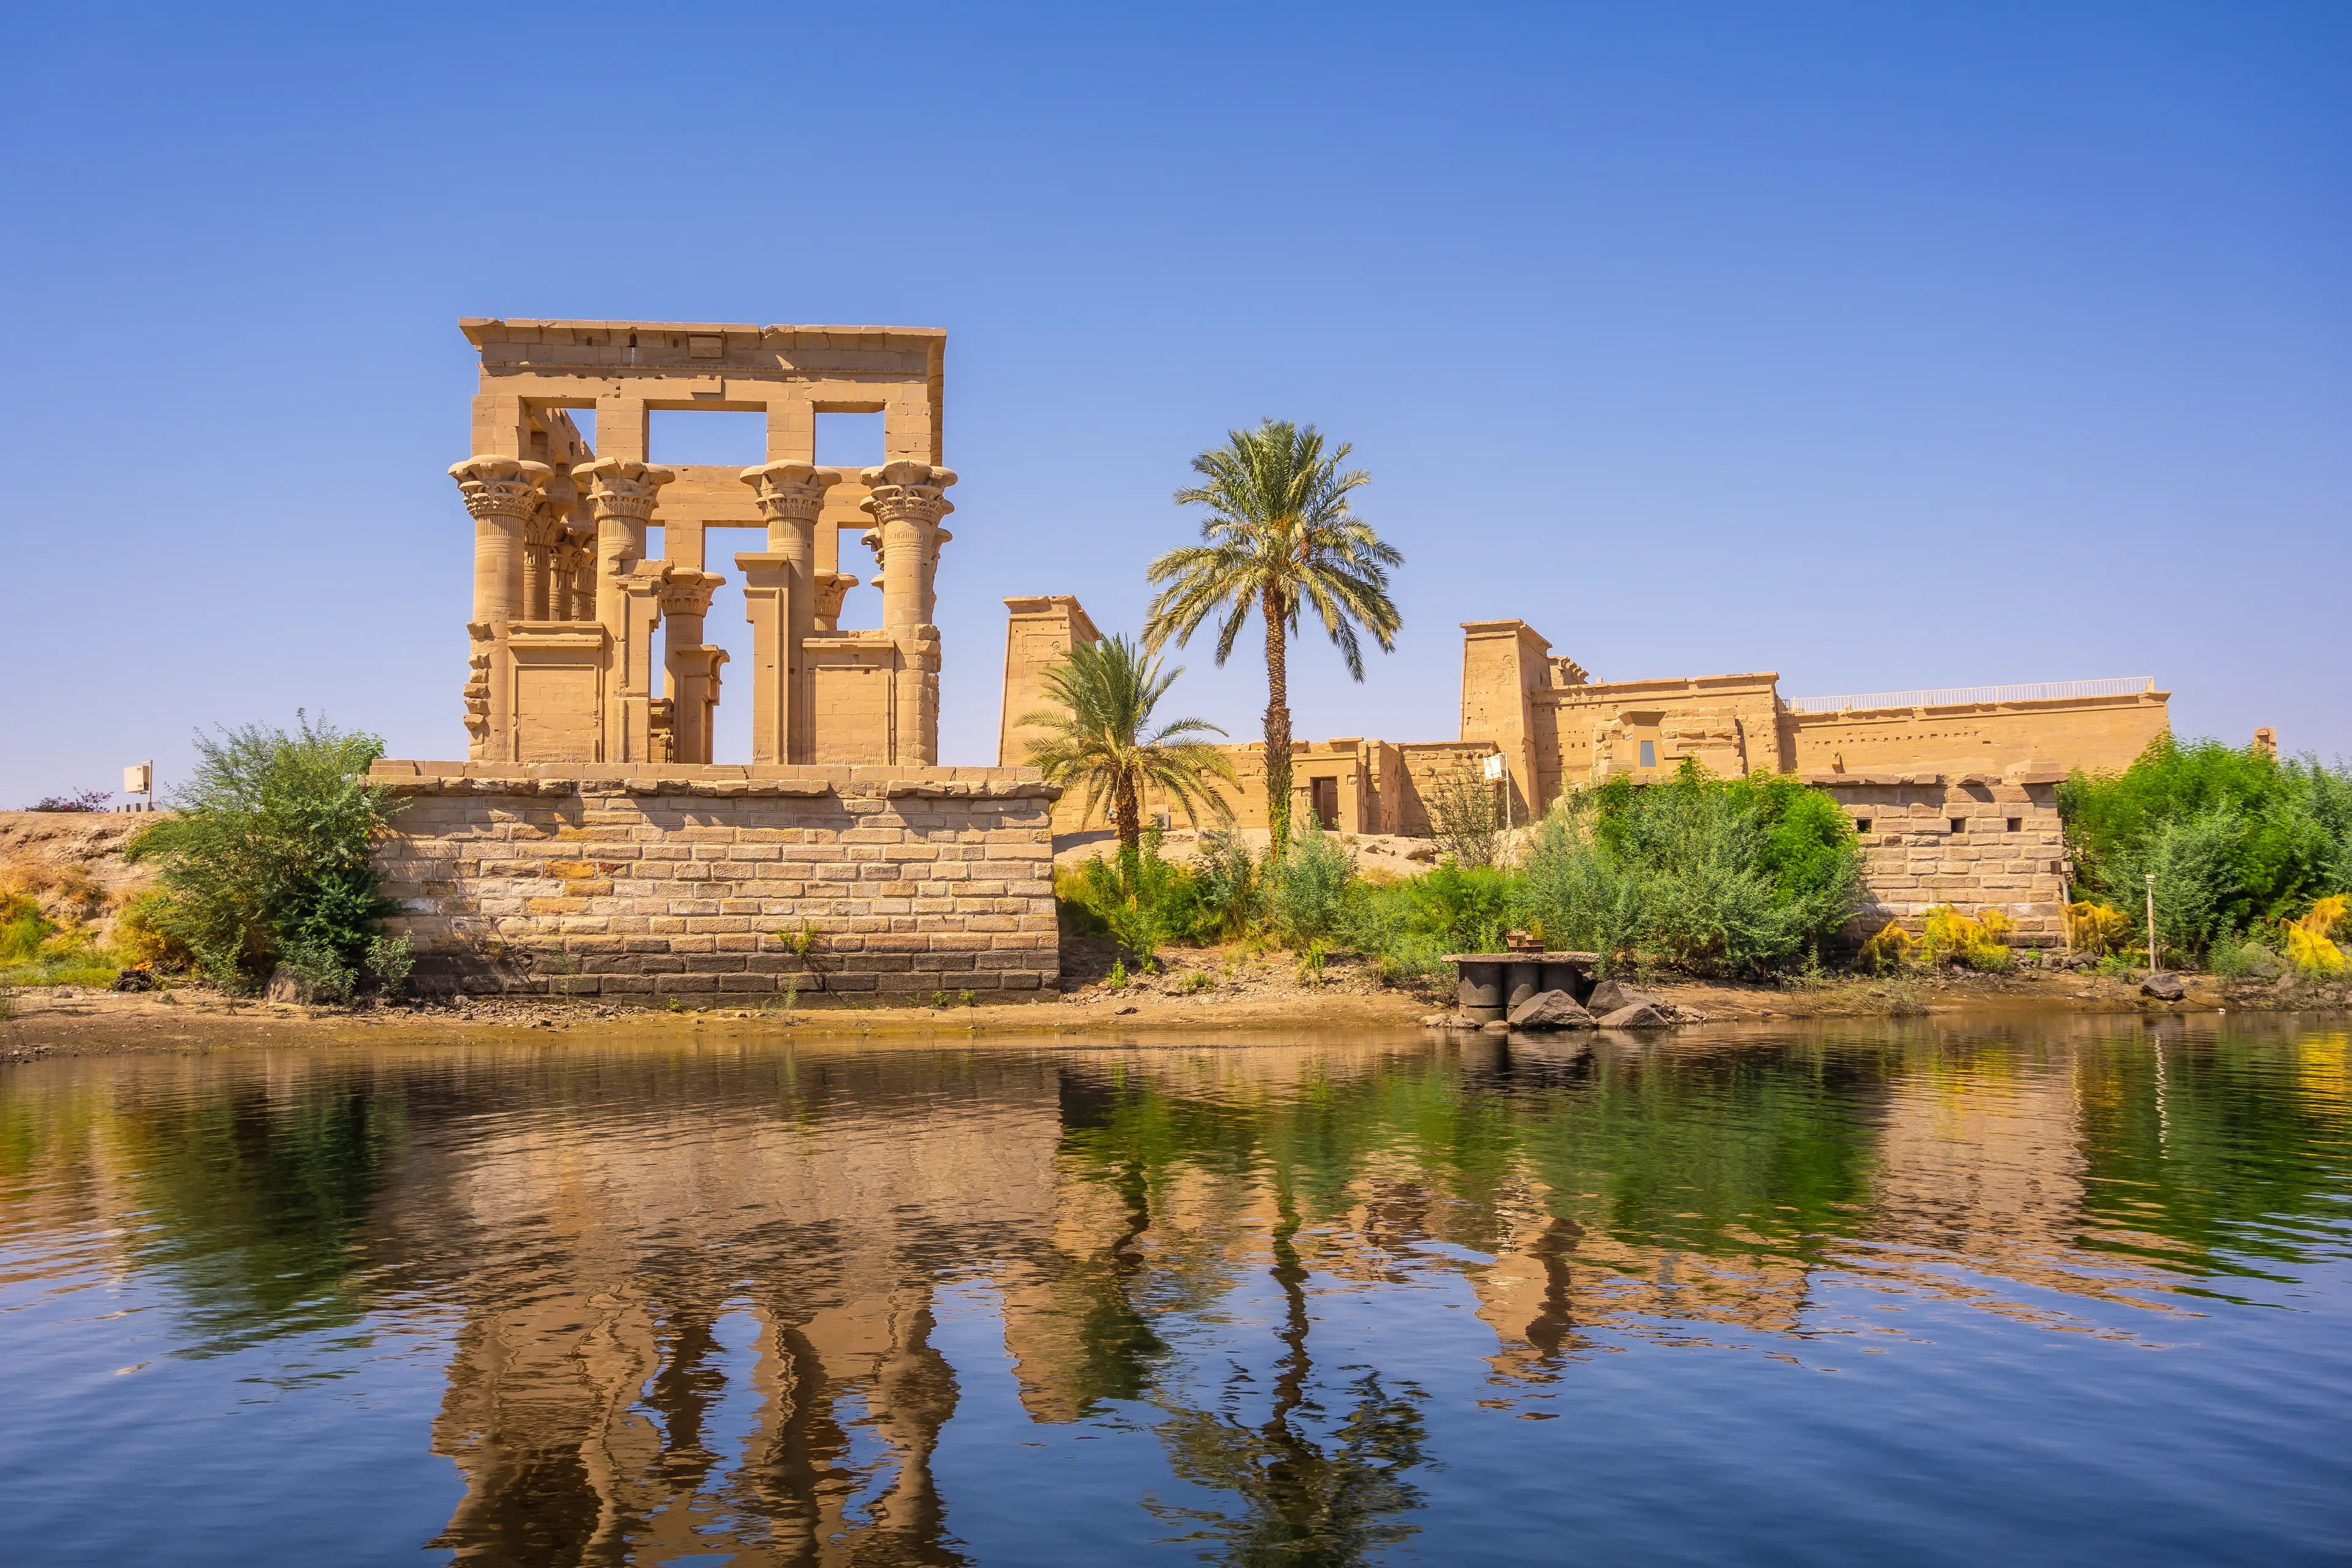 Temple of Philae and the adjascent Greco-Roman buildings